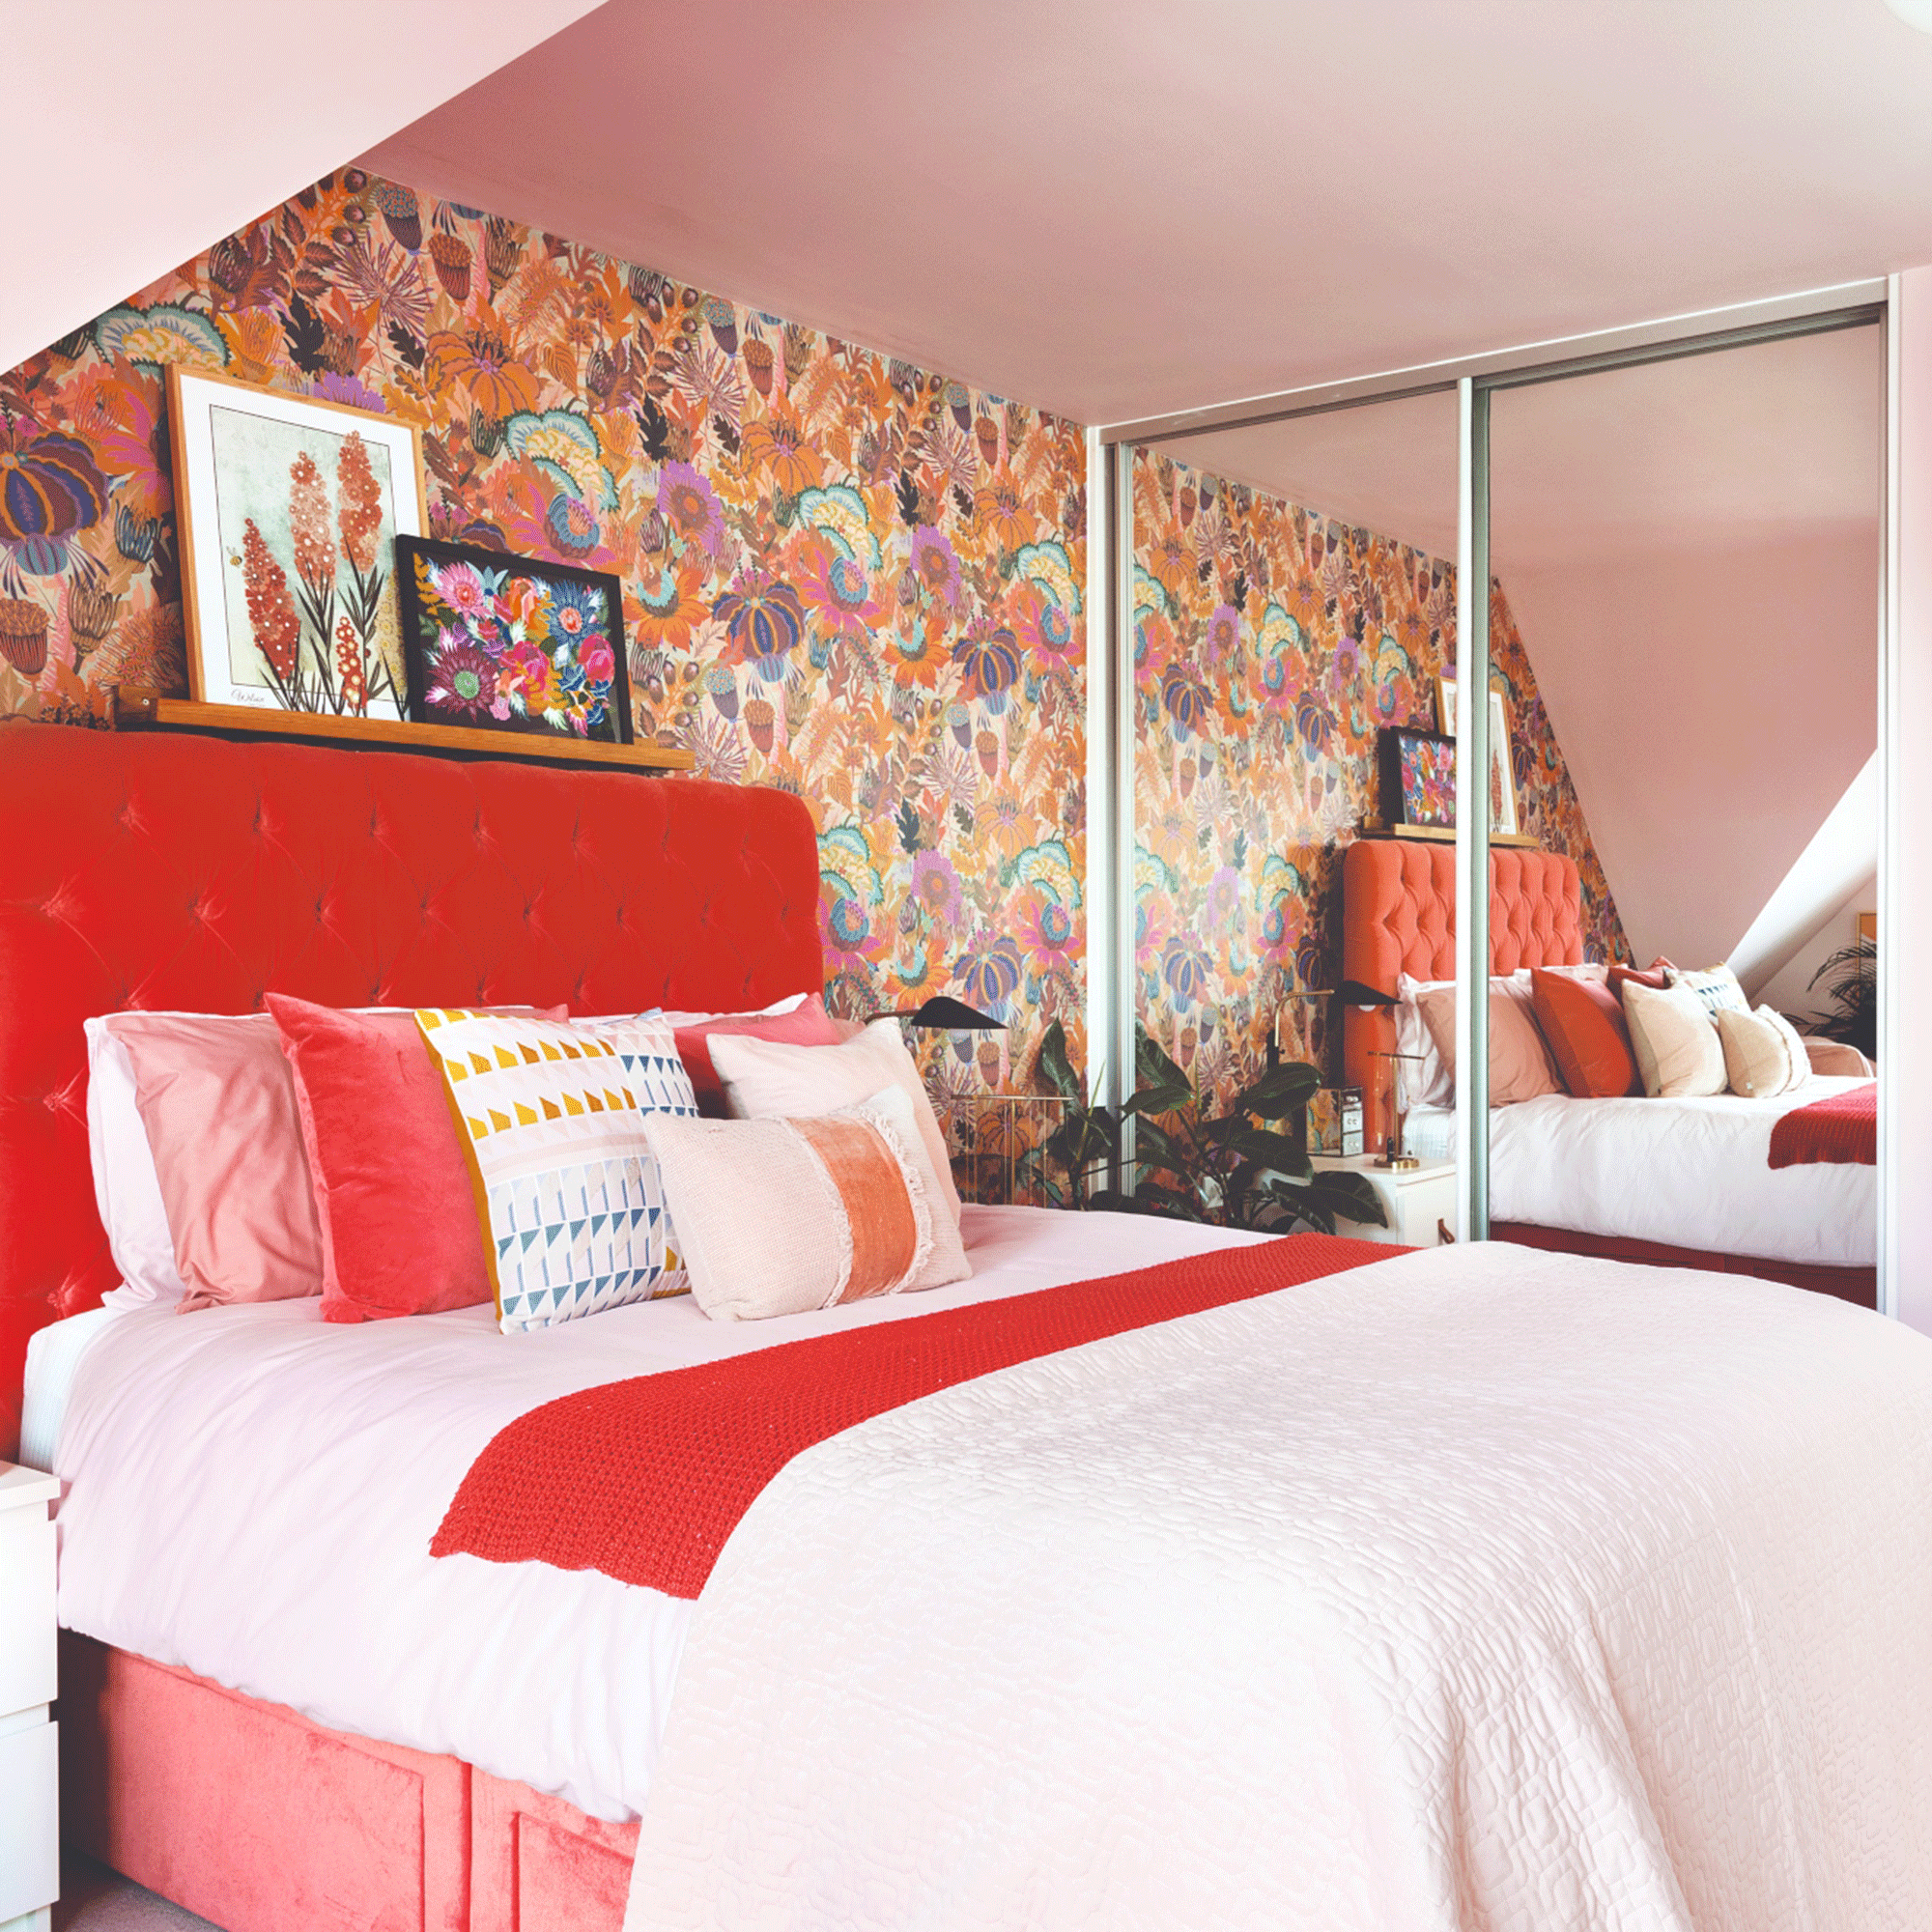 Red headboard with mirrors